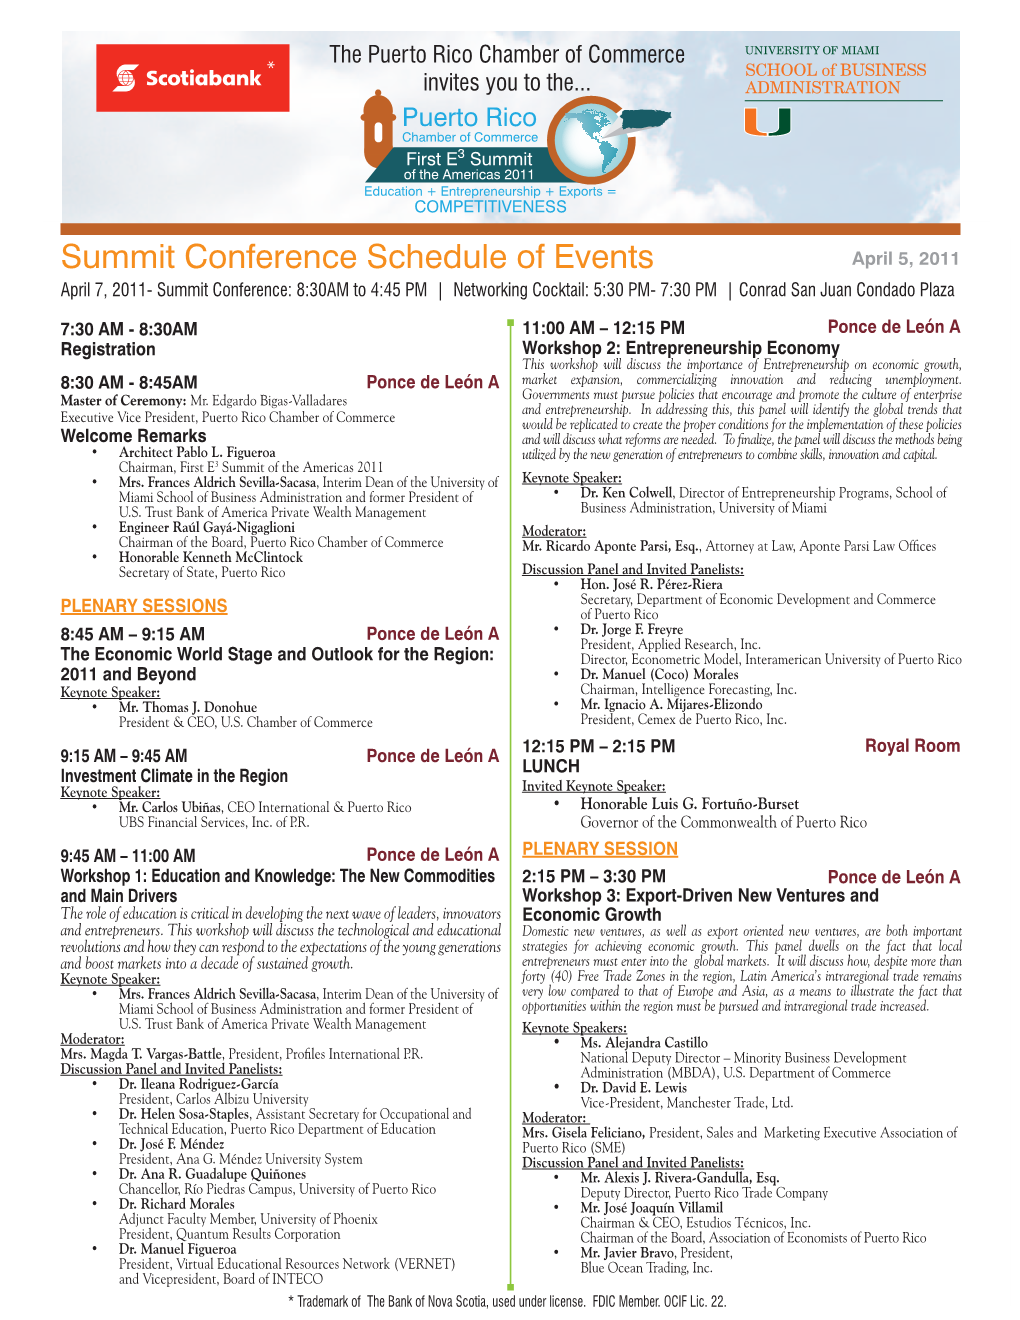 Summit Conference Schedule of Events Education + Entrepreneurship + Exports = COMPETITIVENESS• Mr